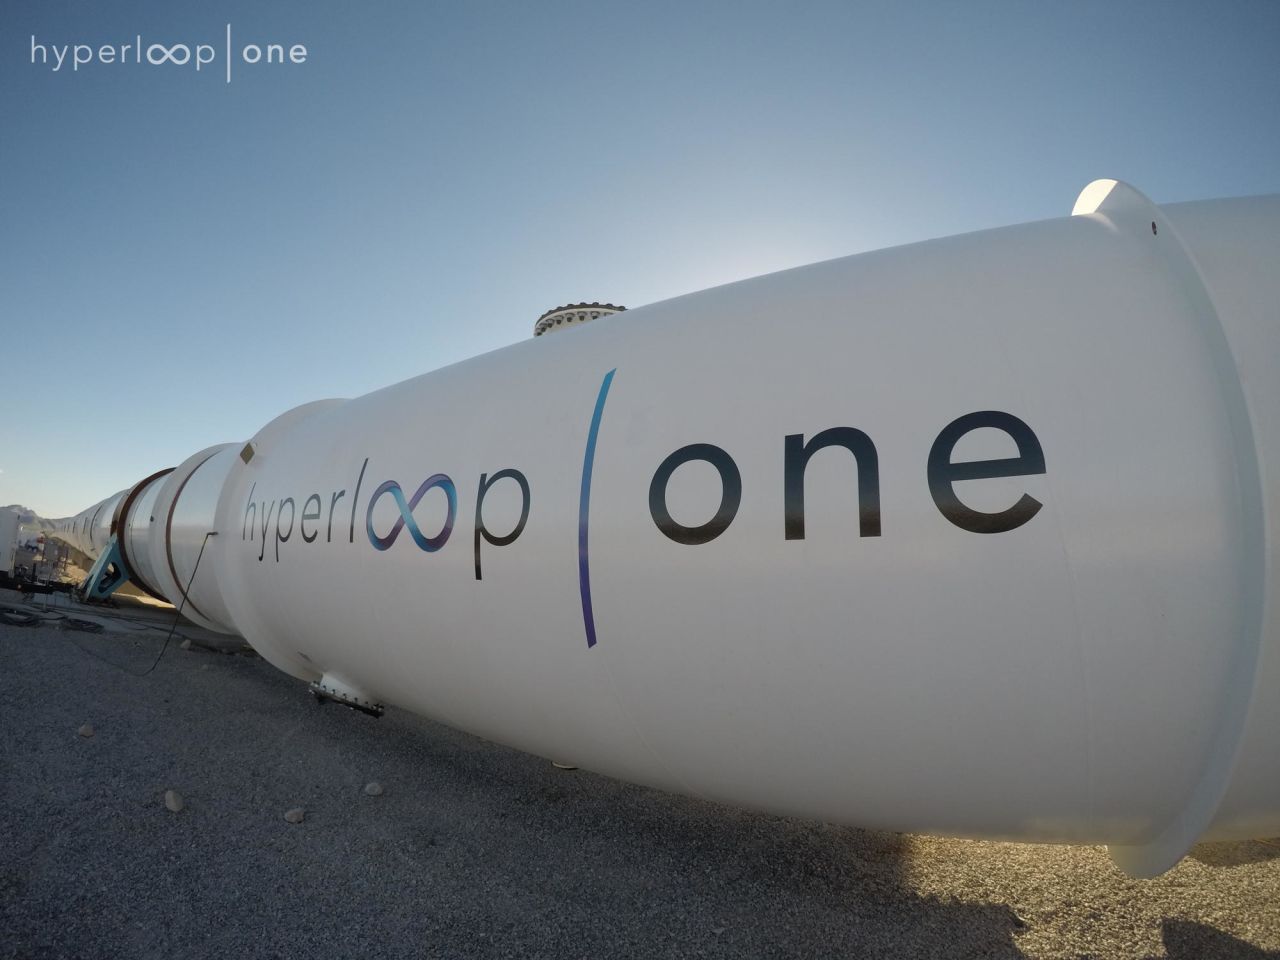 Conceived by Elon Musk but being developed by a number of companies, hyperloop looks to update train technology by utilizing magnetic levitation and vacuum-sealed tubes. One company, Virgin Hyperloop One, is aiming to travel at speeds of 700mph -- more than twice as fast as <a href="https://www.cnn.com/travel/article/japan-record-breaking-maglev-train/index.html" target="_blank">the world's current fastest train</a>. 